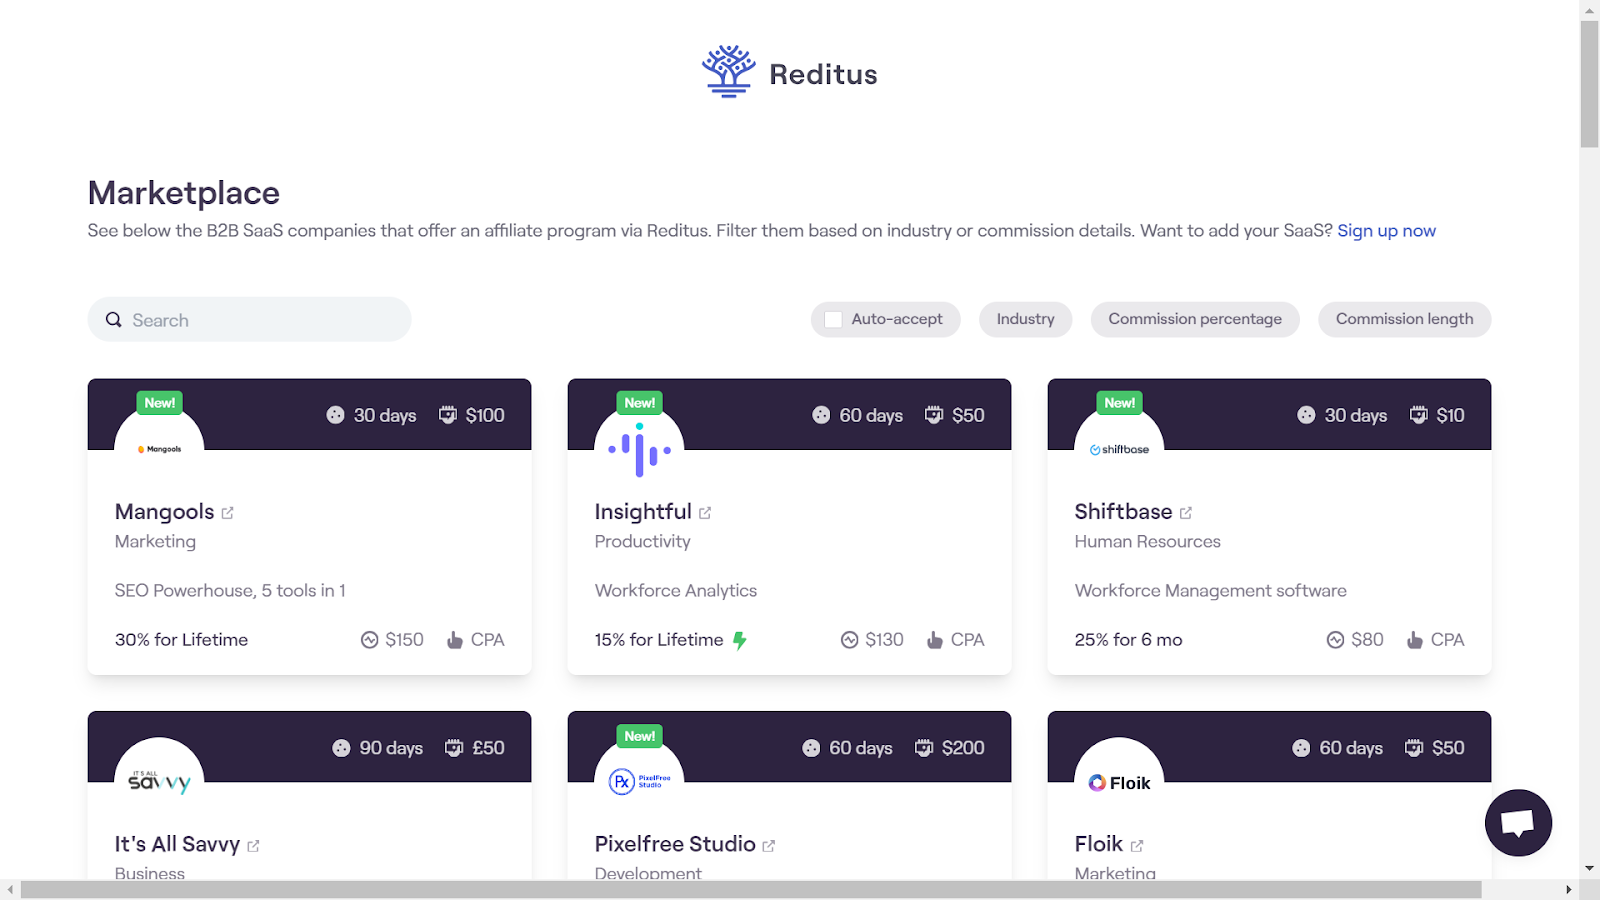 Screenshot from the Reditus Marketplace.